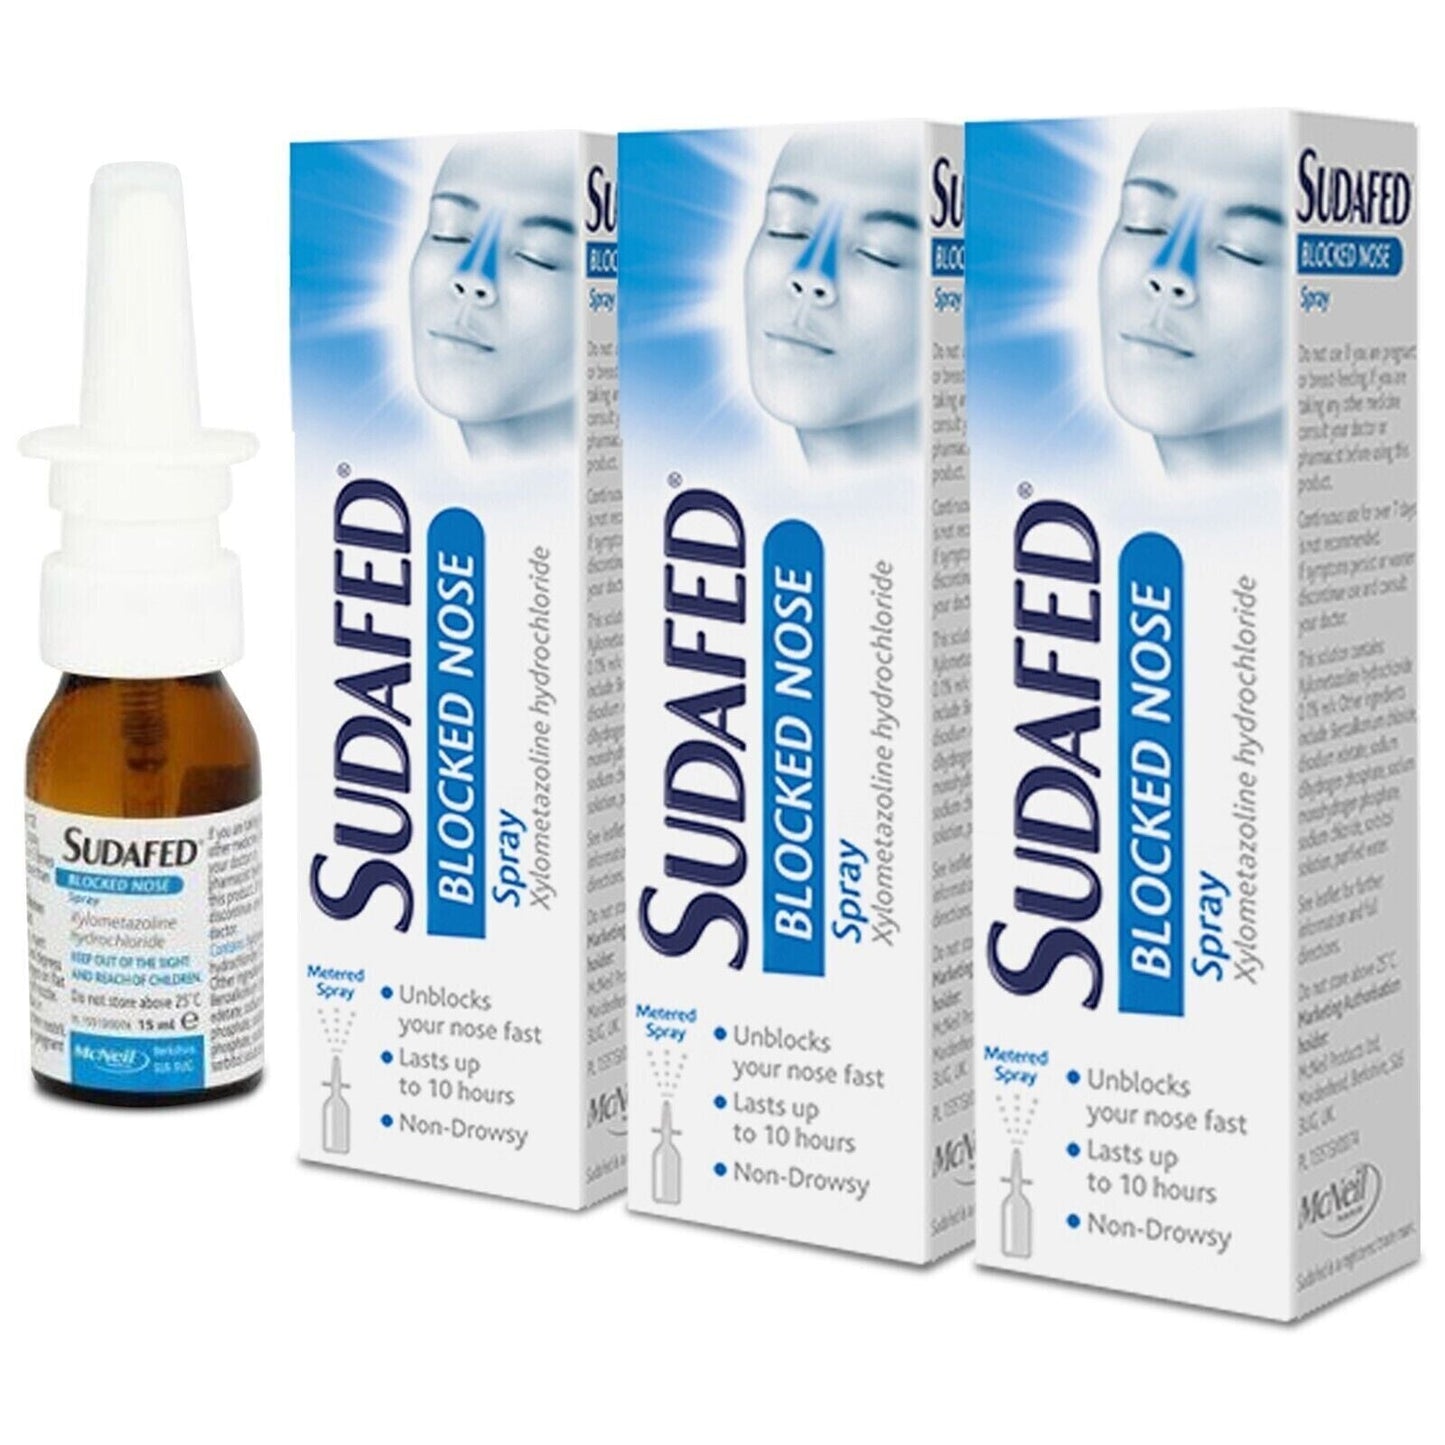 Sudafed Blocked Nose Spray Unblocks Fast Non-Drowsy- 3x 15ml